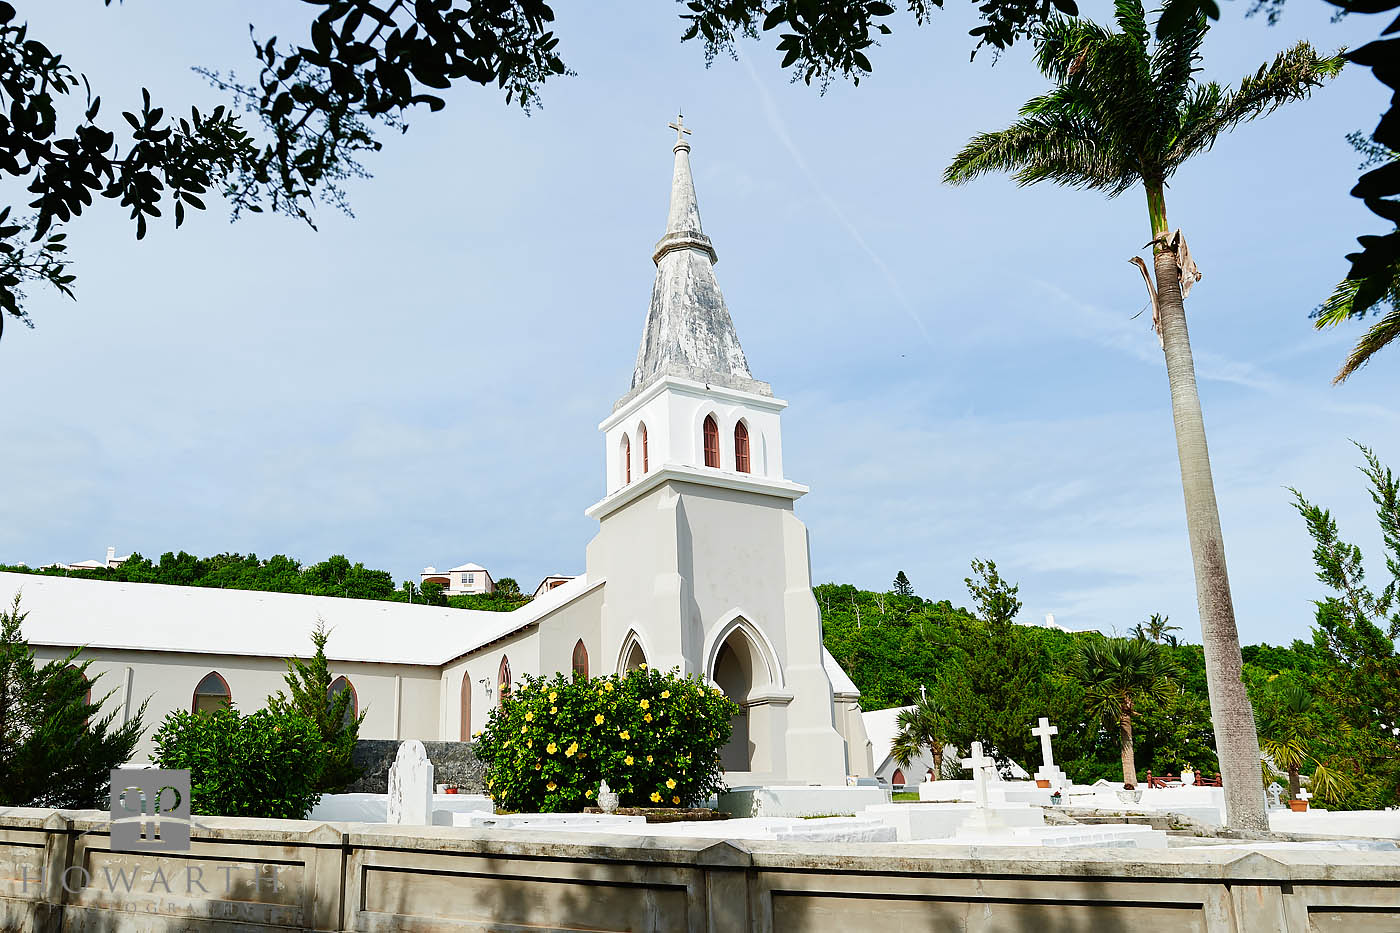 St. John's Anglican Church is one of the oldest parish churches in Bermuda, originally built in 1625